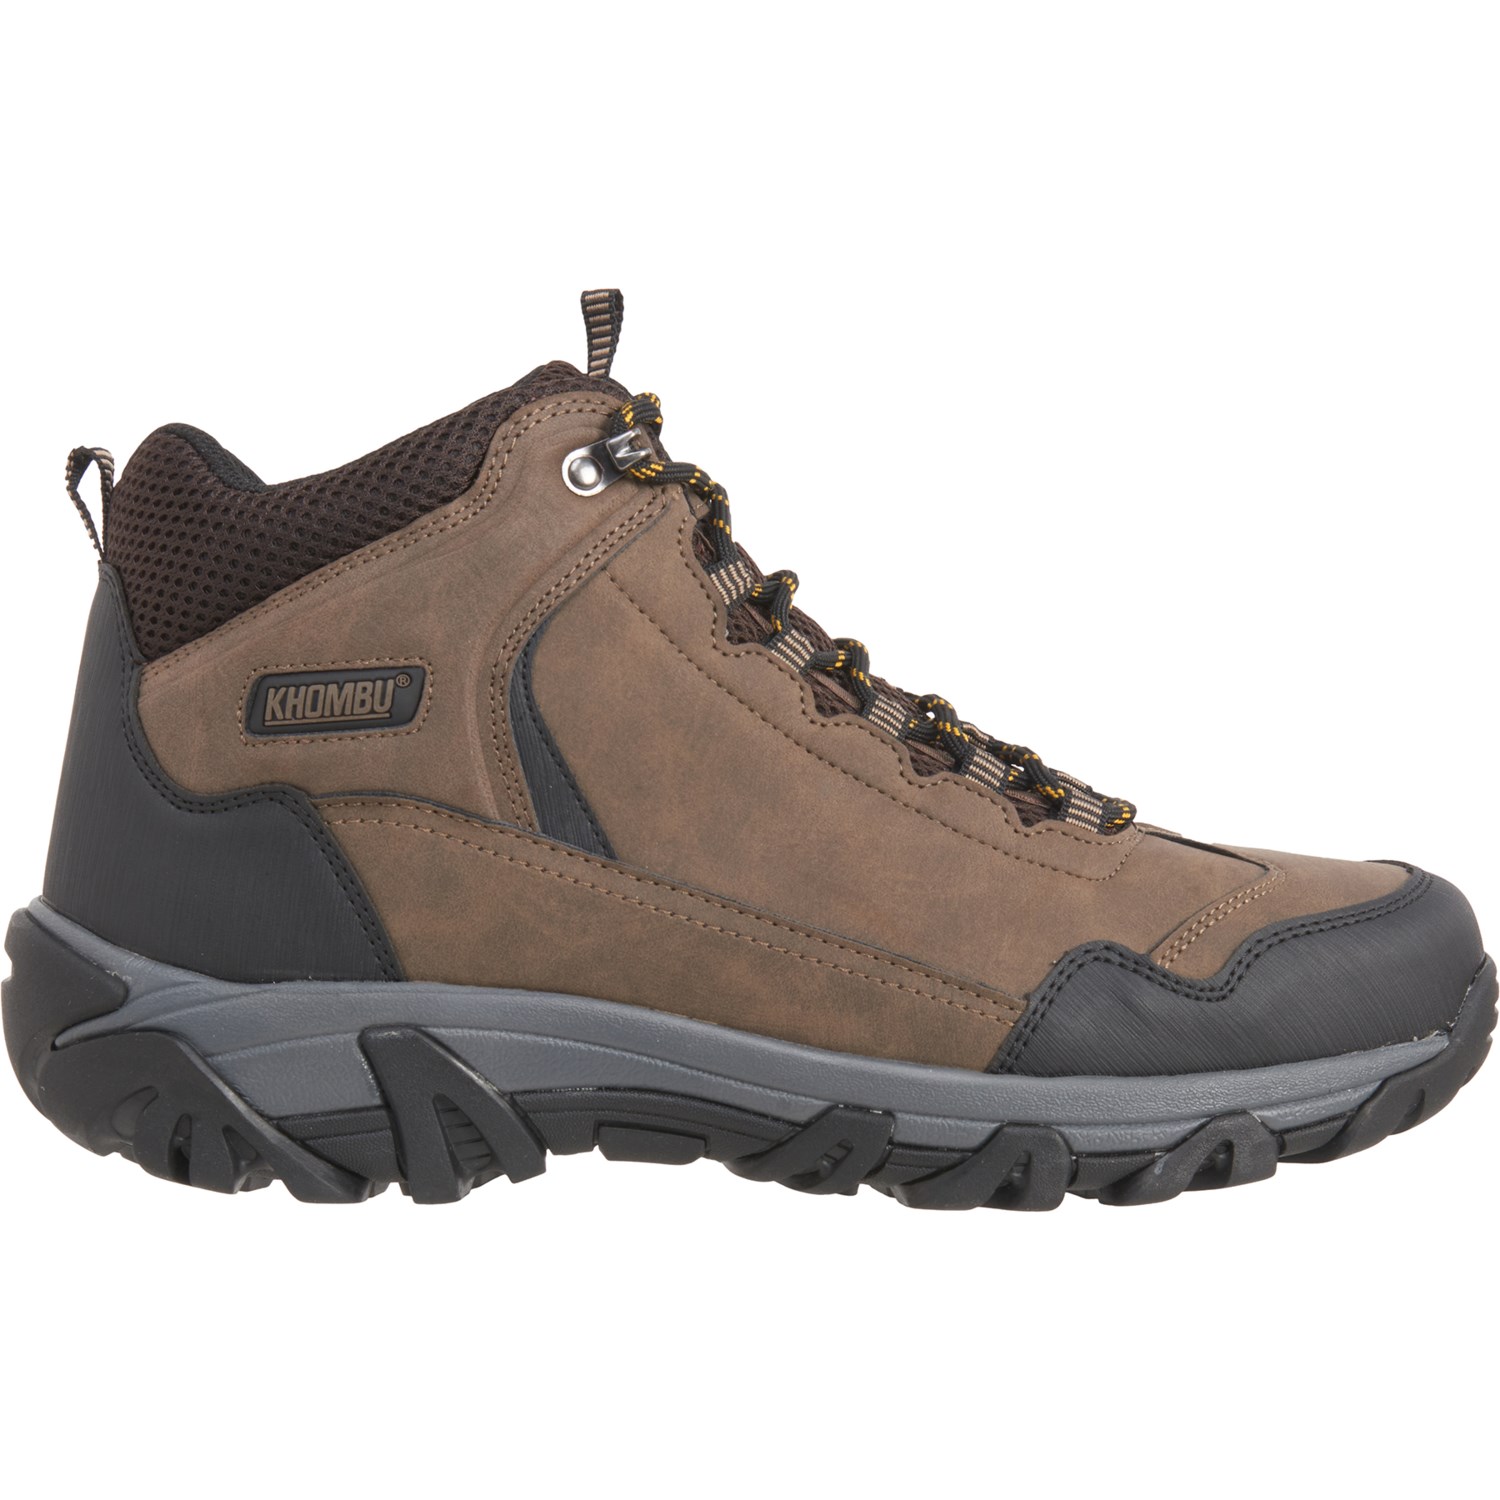 Khombu Ollie Mid Hiking Boots (For Men) - Save 66%